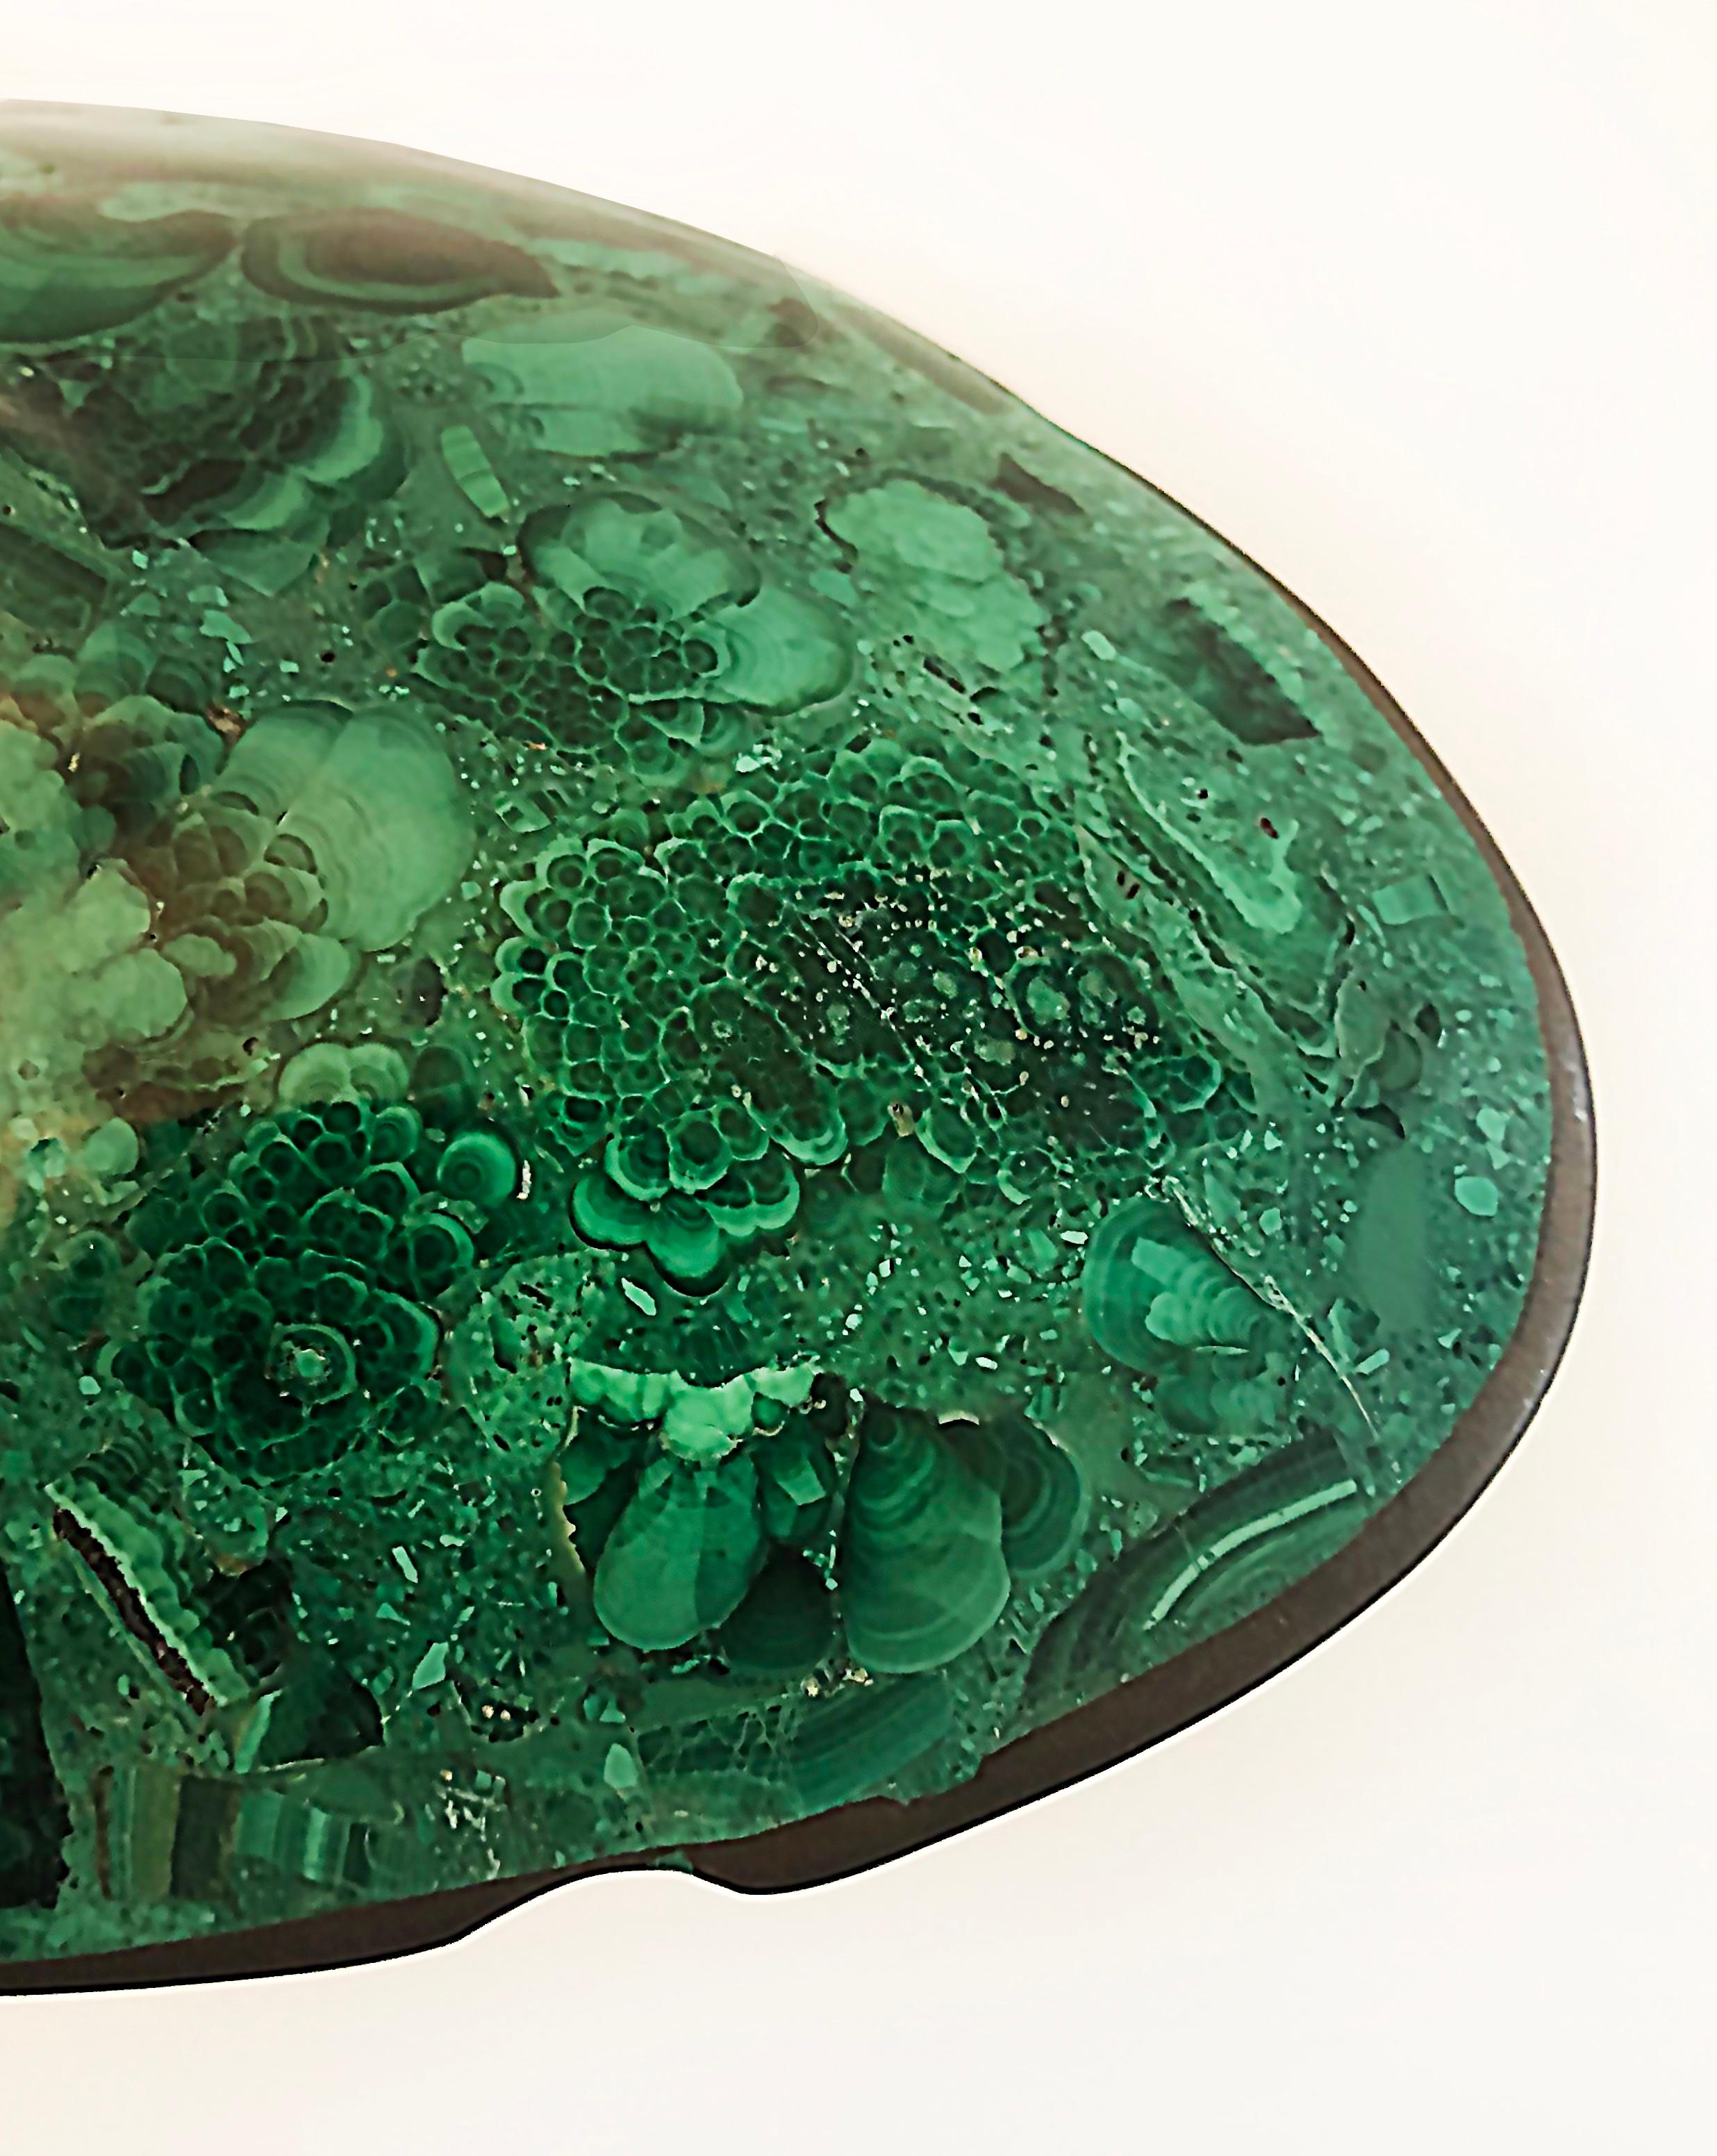 Small African Malachite carved stone oval tray catchall

Offered for sale is a small Modern 20th-century African malachite carved stone oval tray that is embellished with a thin brass rim. The piece is made in Zaire (Congo). It retains the original